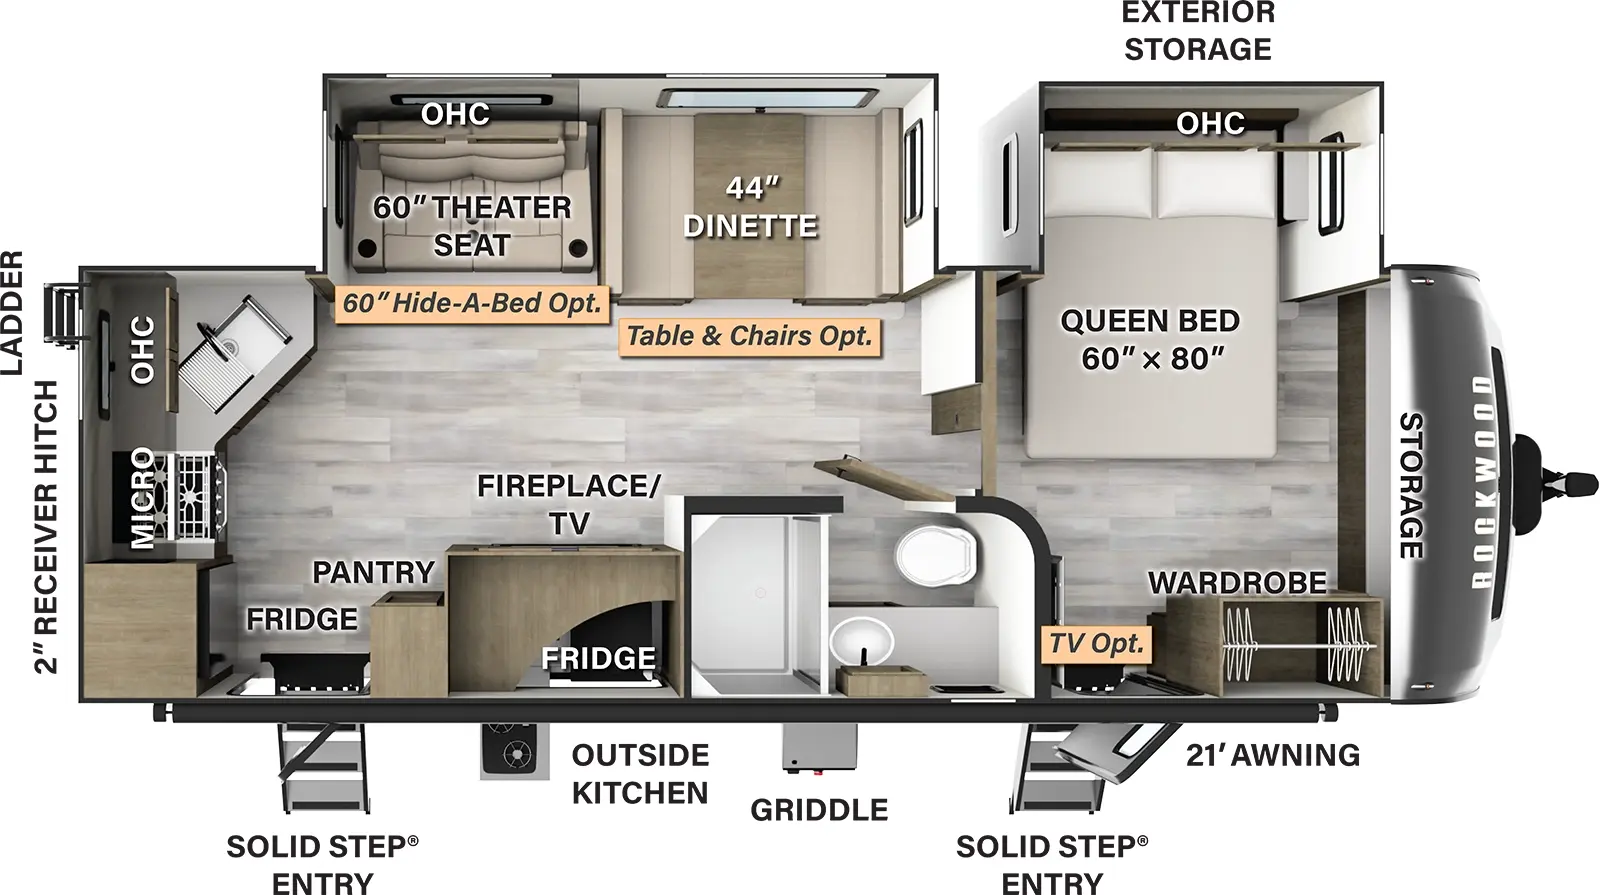 The 2614BS has two slideouts and two entries. Exterior features a 21 foot awning, solid step entries, outside kitchen with refrigerator, exterior storage, griddle, rear ladder, and 2 inch receiver hitch. Interior layout front to back: front bedroom with front storage, door side entry and wardrobe, and off-door side queen bed slideout with overhead cabinets (TV optional); door side full bathroom; off-door side slideout with dinette (table and chairs optional) and theater seating (hide-a-bed optional) with overhead cabinet; door side TV and fireplace, pantry and second entry; rear kitchen with sink, microwave, cooktop, refrigerator, and overhead cabinets.